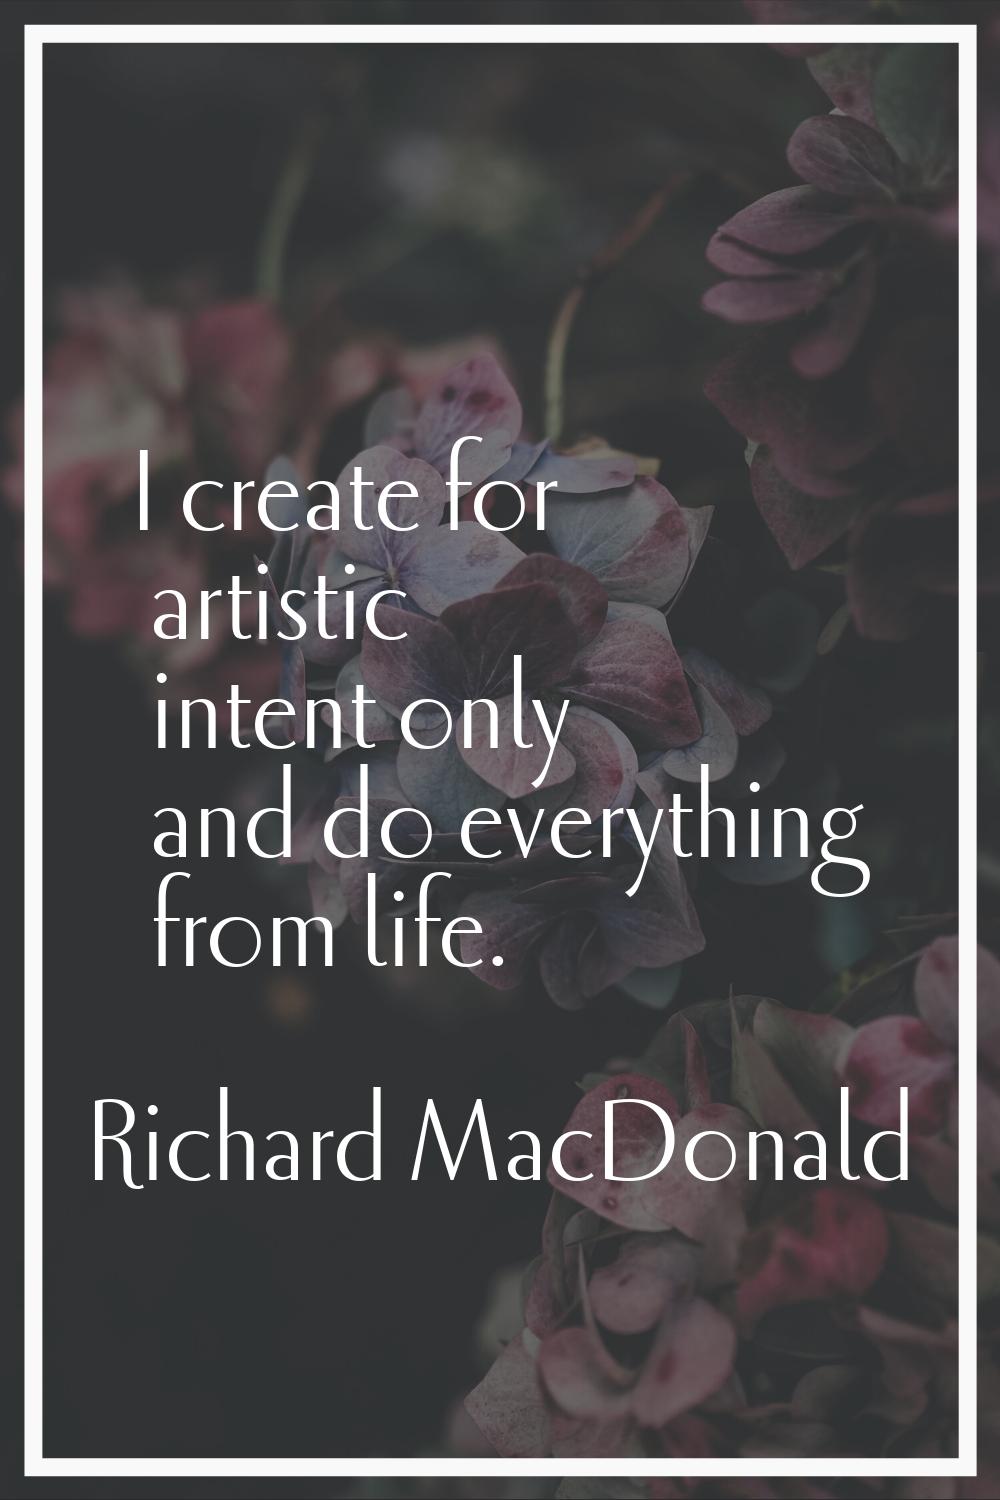 I create for artistic intent only and do everything from life.